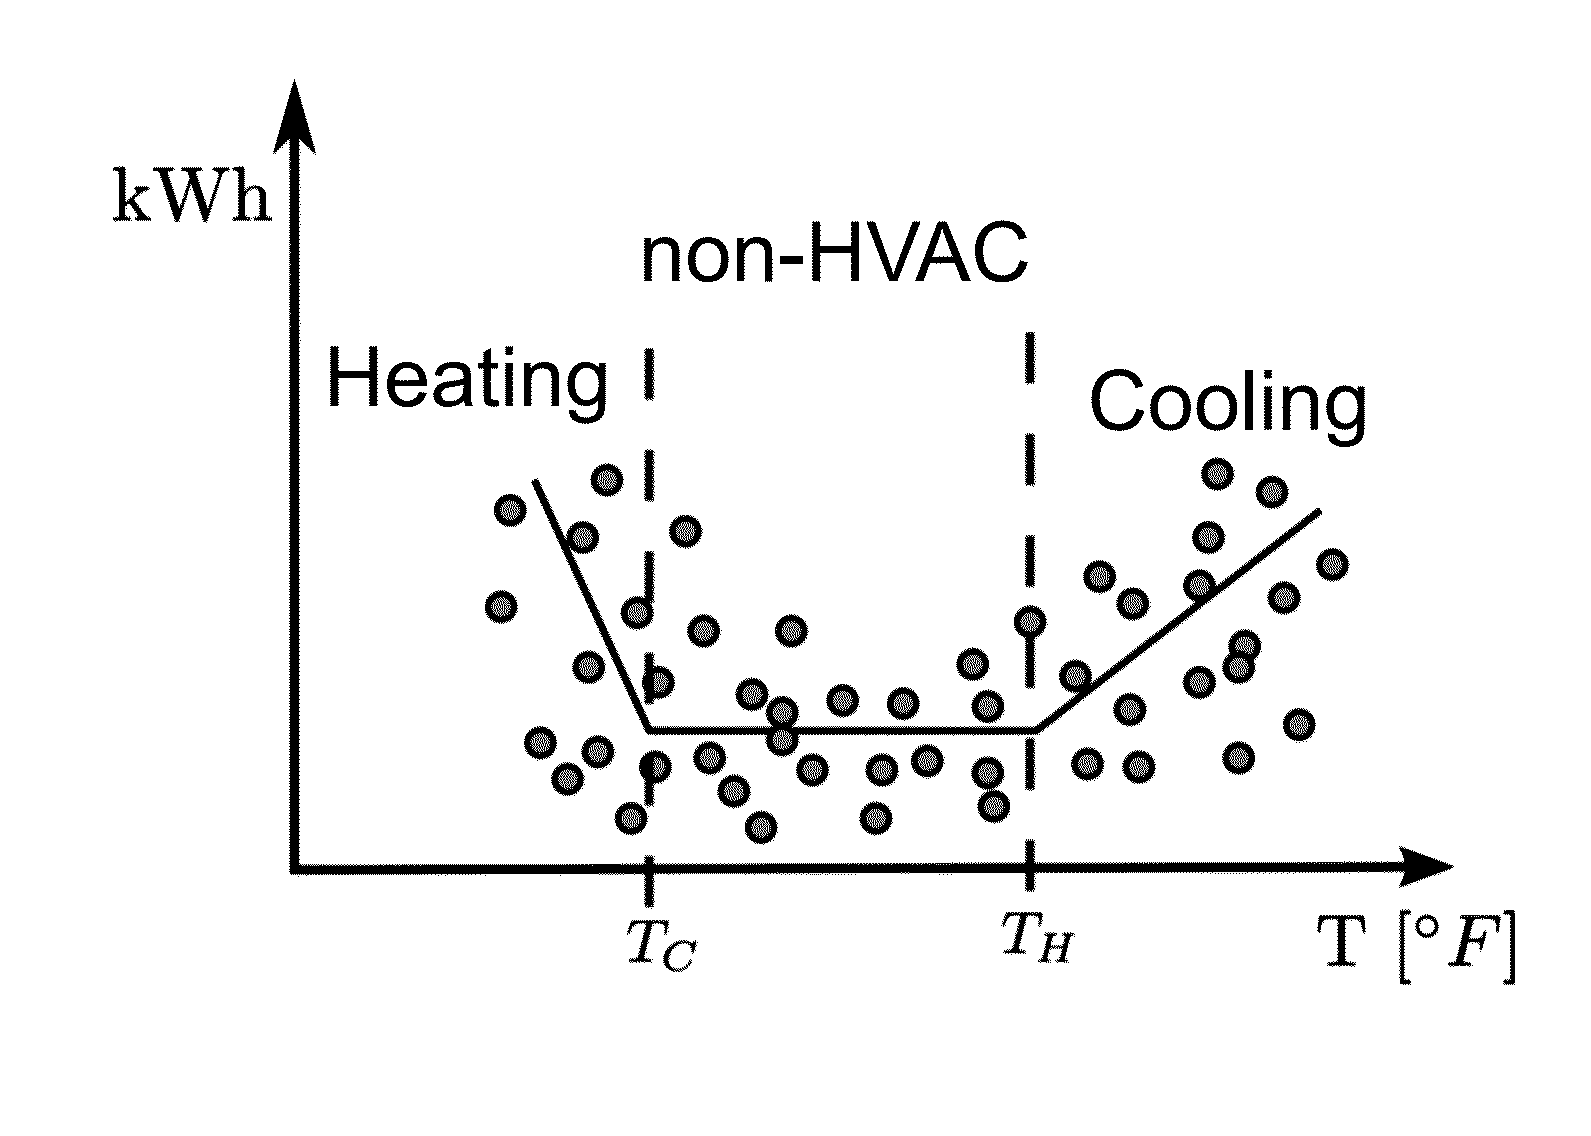 Method and system for profiling and scheduling of thermal residential energy use for demand-side management programs